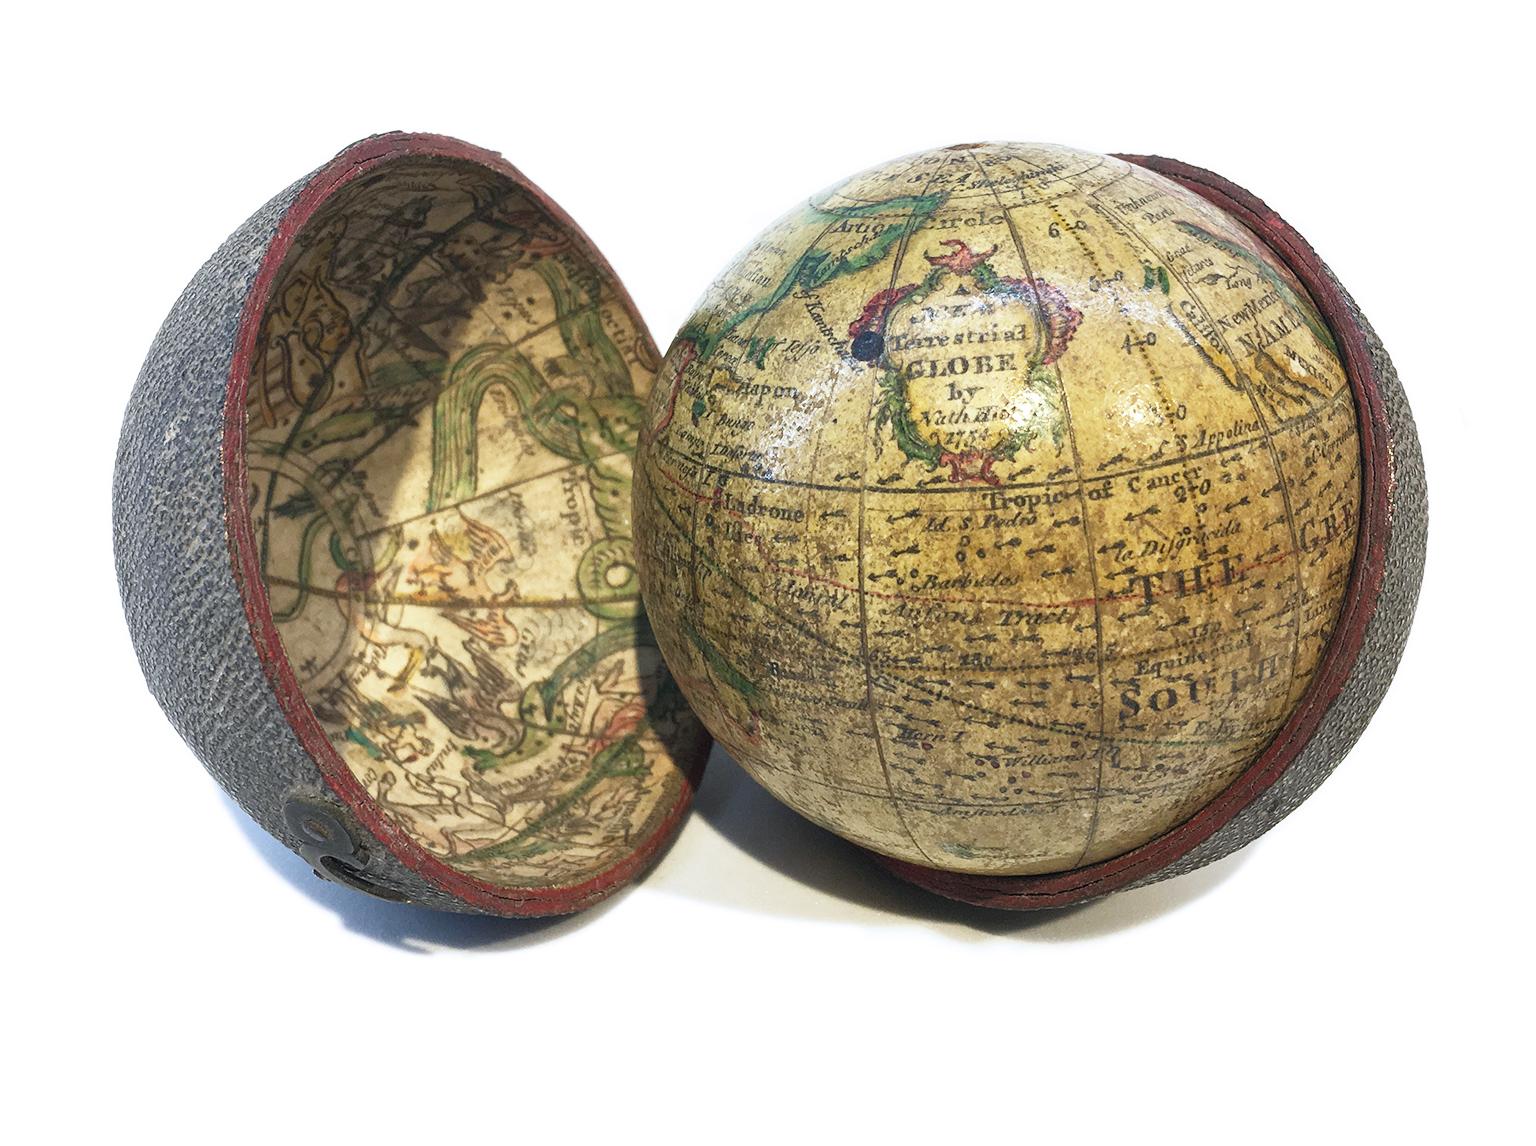 Nathaniel Hill
Pocket globe
London, 1754

The globe is contained in its original case, which itself is covered in shark skin.
There are slight gaps in the original paint on the sphere. The case no longer closes.

The sphere measures 2.6 in (6.8 cm)